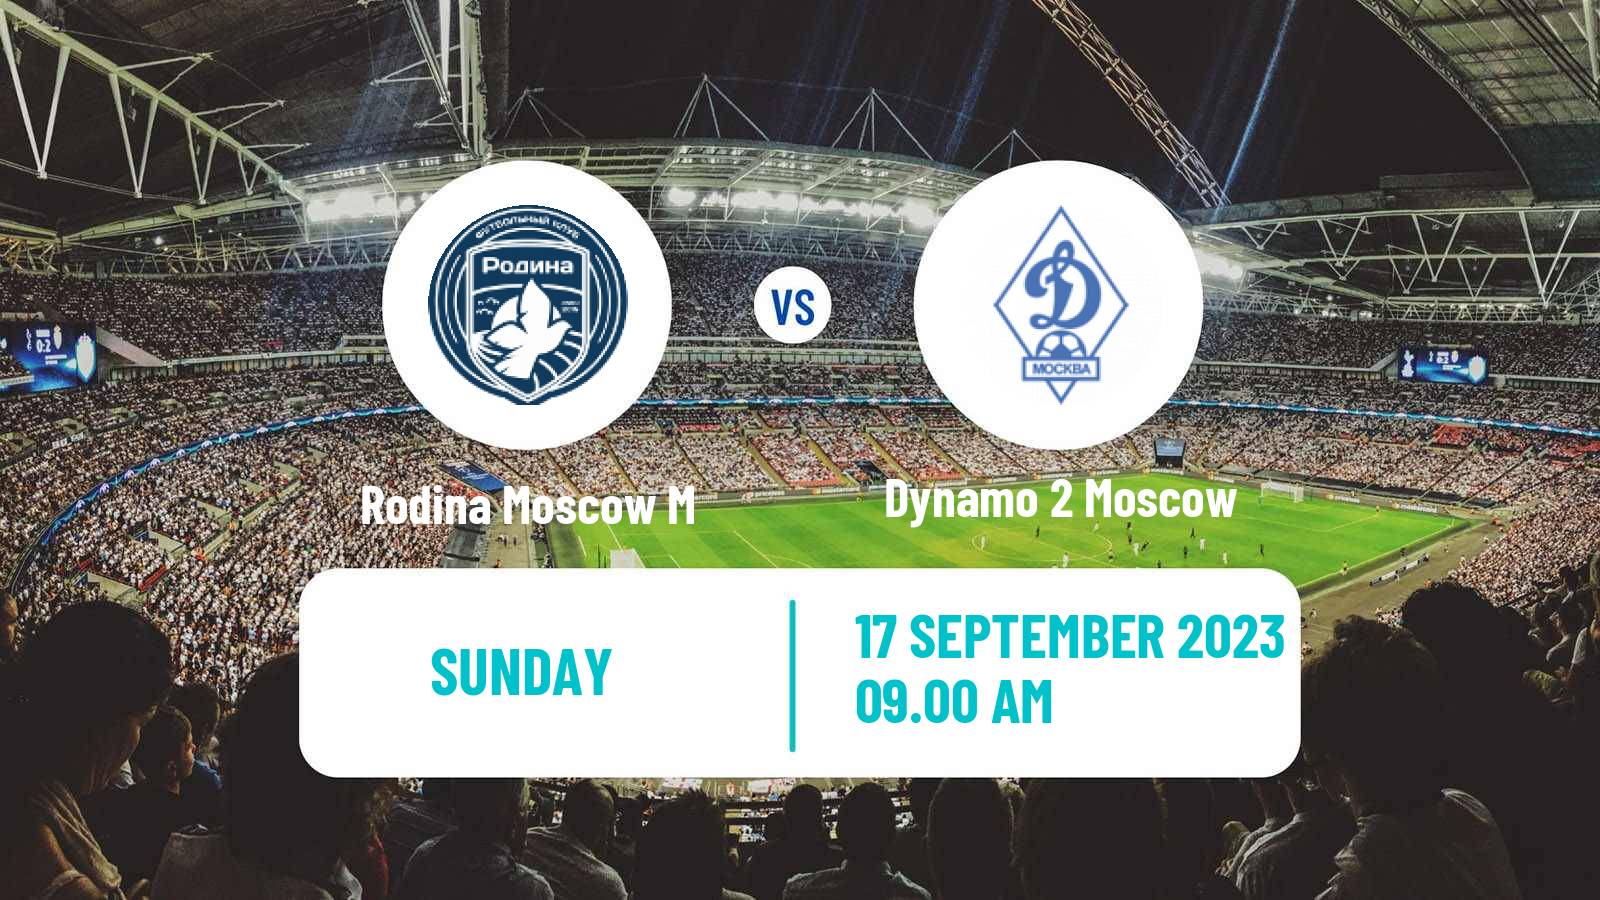 Soccer FNL 2 Division B Group 2 Rodina Moscow M - Dynamo 2 Moscow